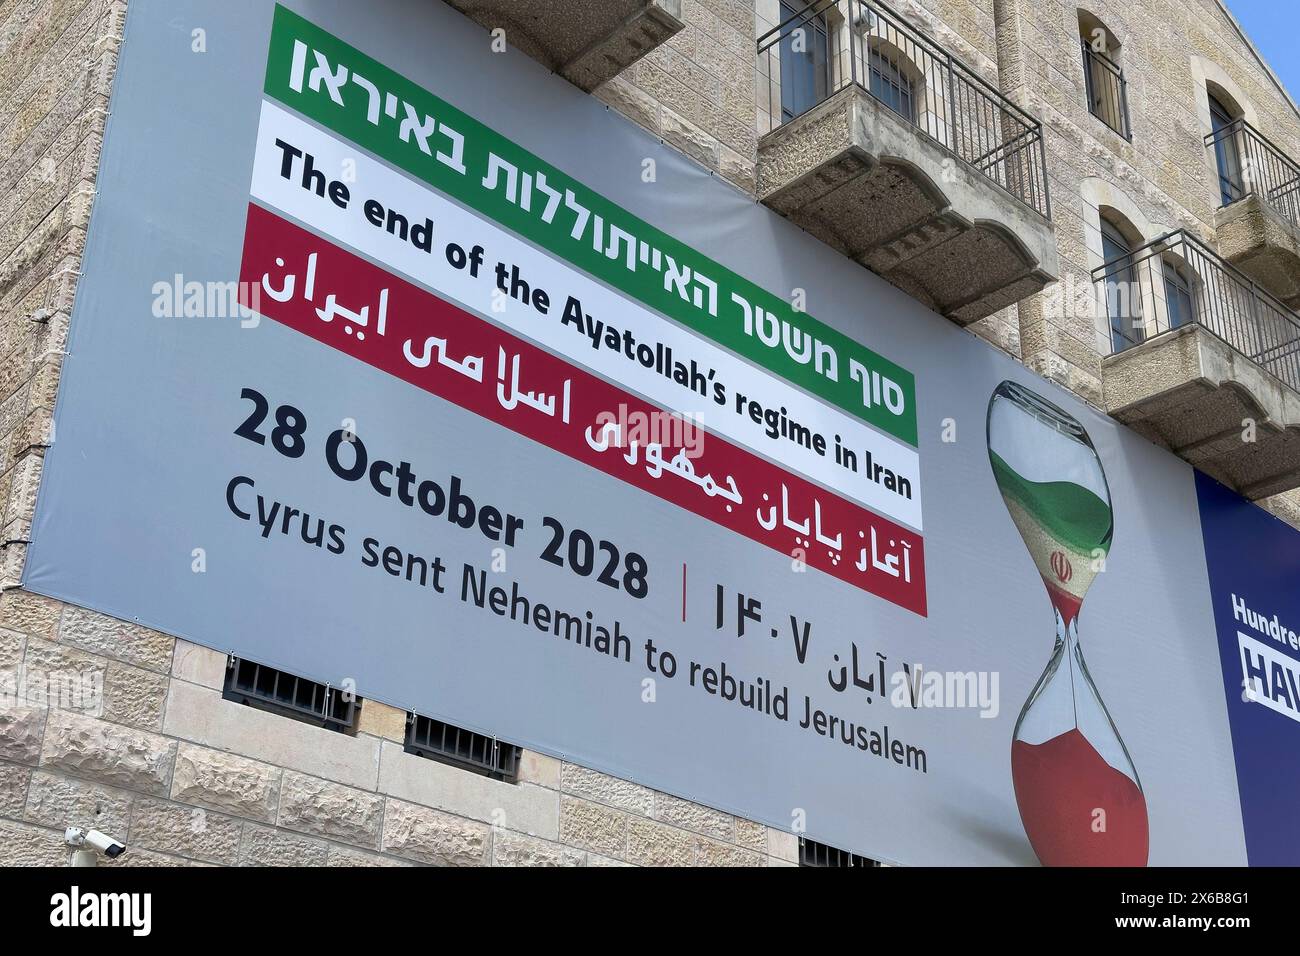 JERUSALEM - MAY 6: A sign that reads 'The end of the Ayatollah's regime in Iran, 28 October 2028' is displayed on the building housing The Friends of Zion Museum which celebrates Christian Zionists and their contribution to Israel, amid continuing battles between Israel and the militant group Hamas in the Gaza Strip on May 6, 2024 in Jerusalem. Kamal Kharrazi, an adviser to Iran's Supreme Leader Ayatollah Ali Khamenei, warned Tehran would rethink its nuclear doctrine if Israel threatens its existence amid West Asian upheaval after the Gaza war. Stock Photo